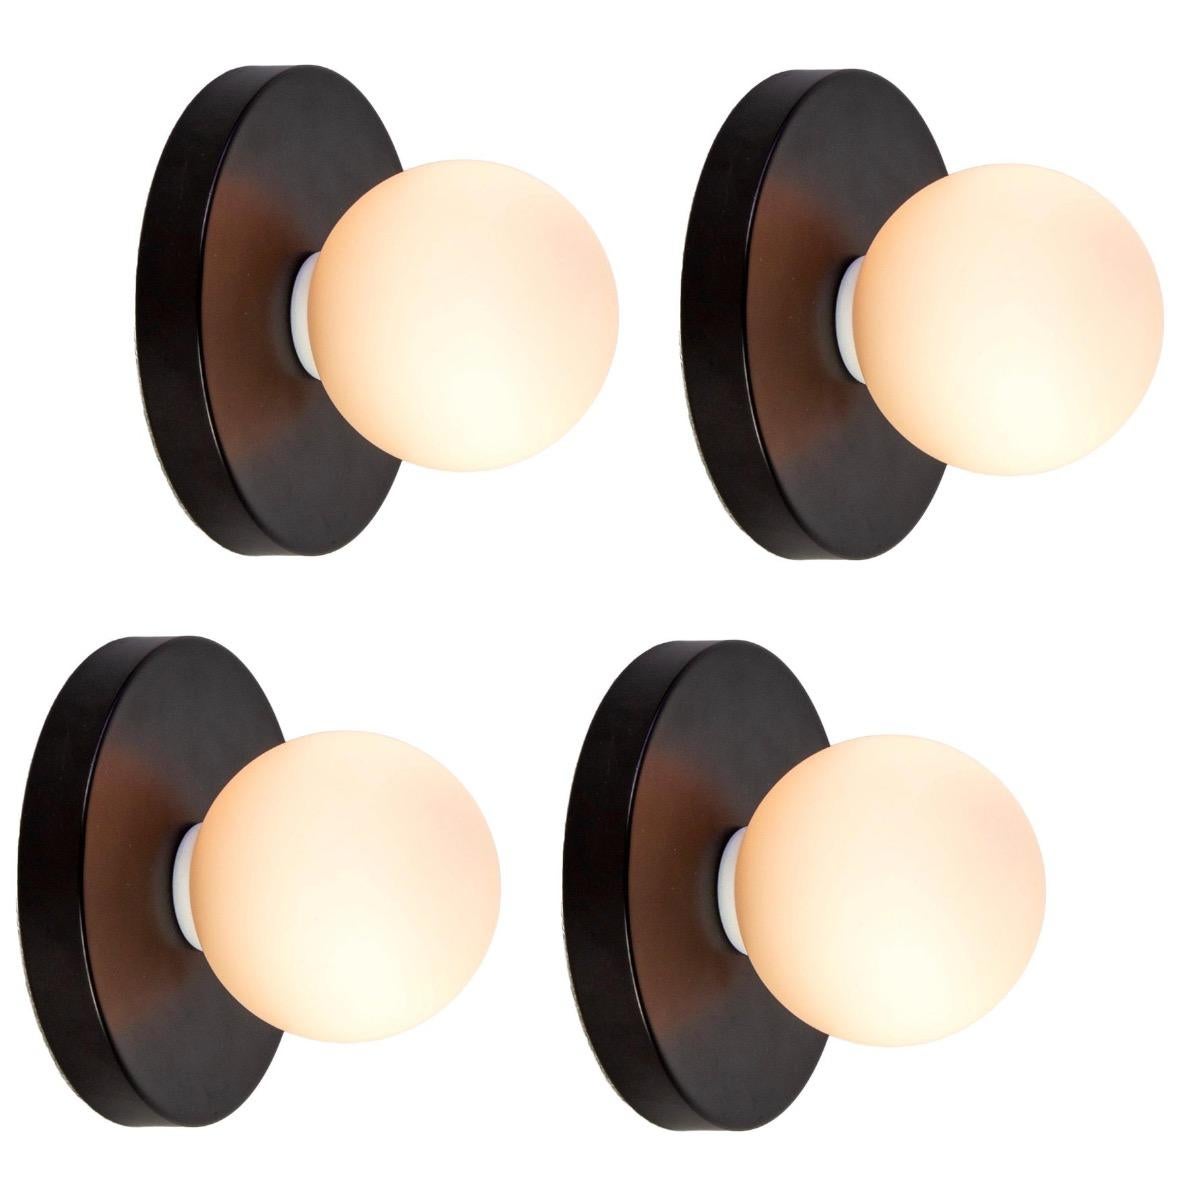 Set of 4 Globe Sconces by Research.Lighting, Black, Made to Order For Sale